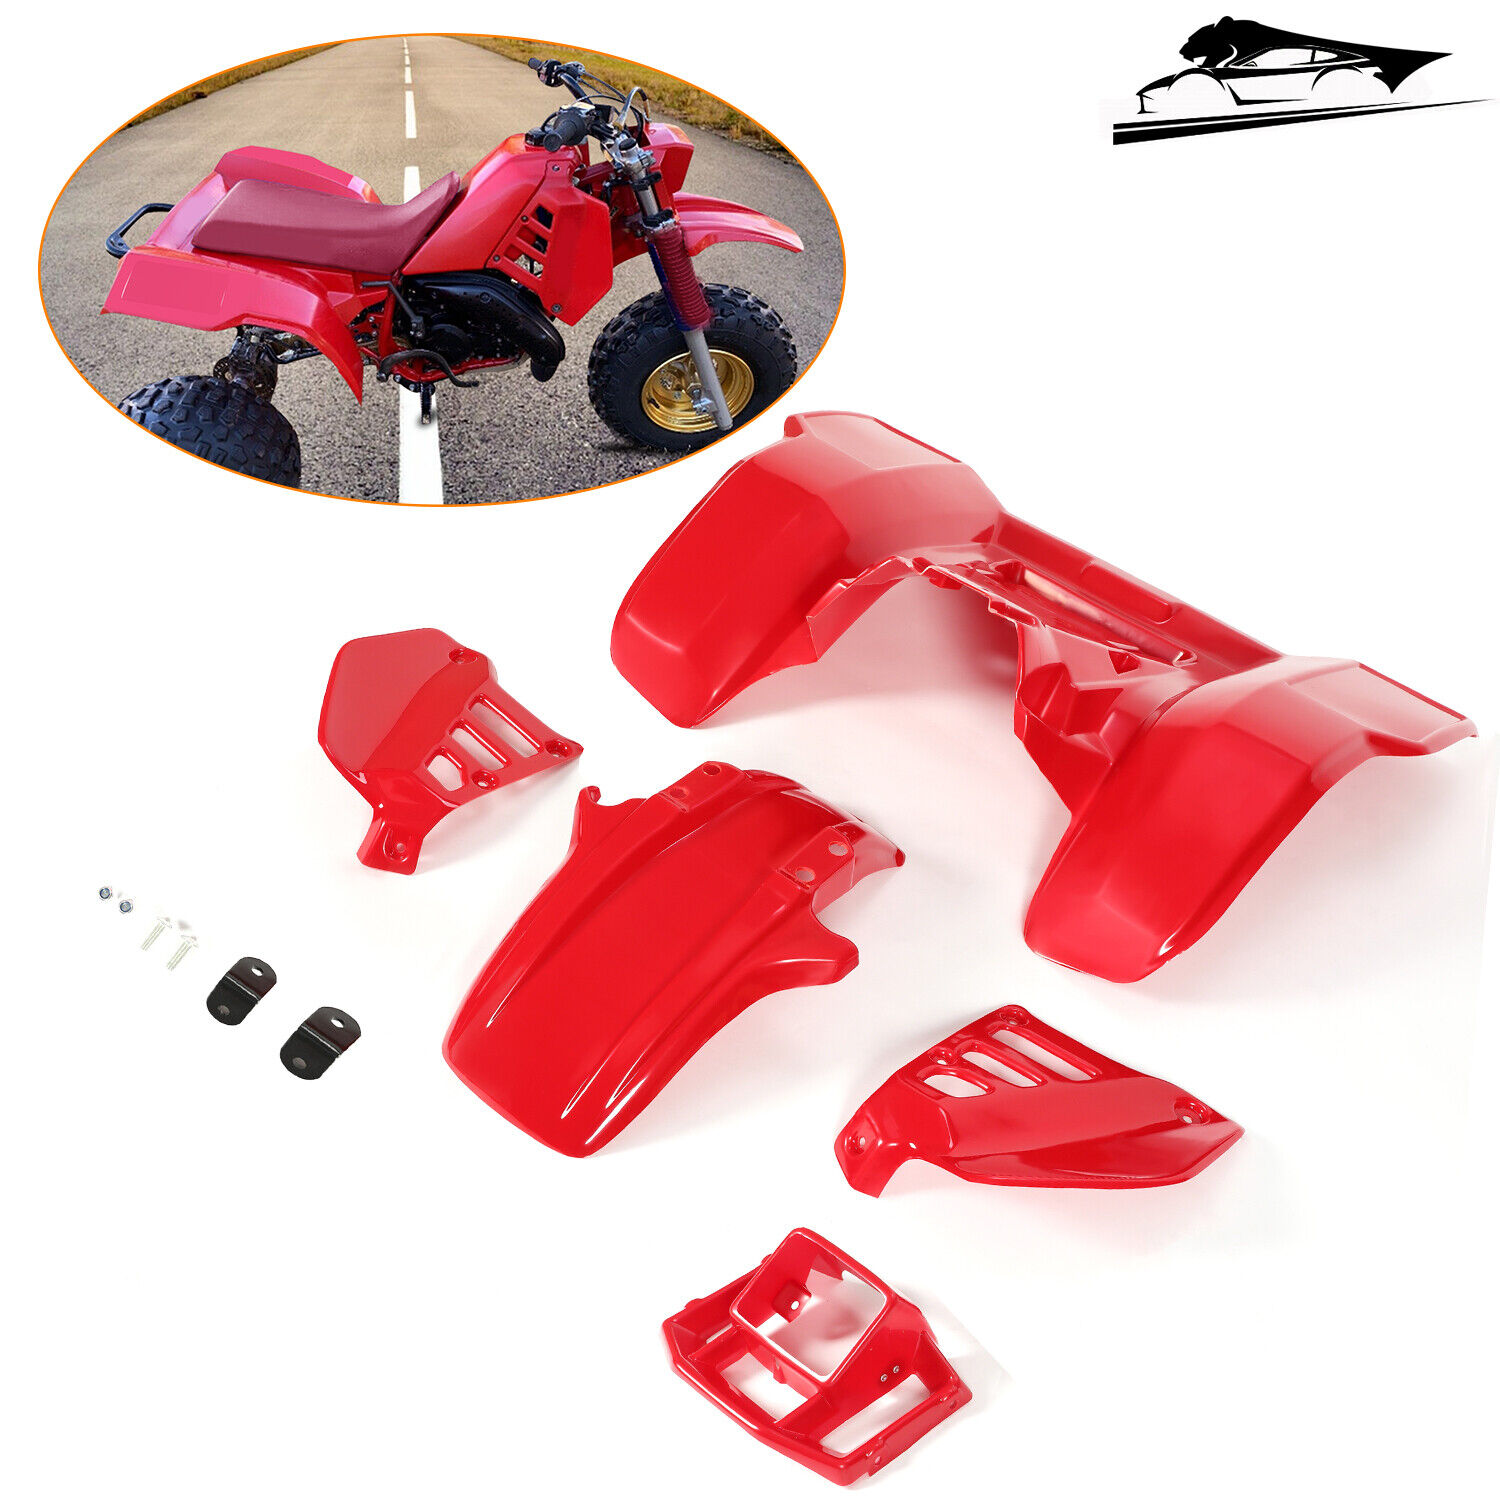 NEW FOR HONDA ATC250R ATC 250R 85 RED FRONT AND REAR FENDER COMPLETE SET 1985